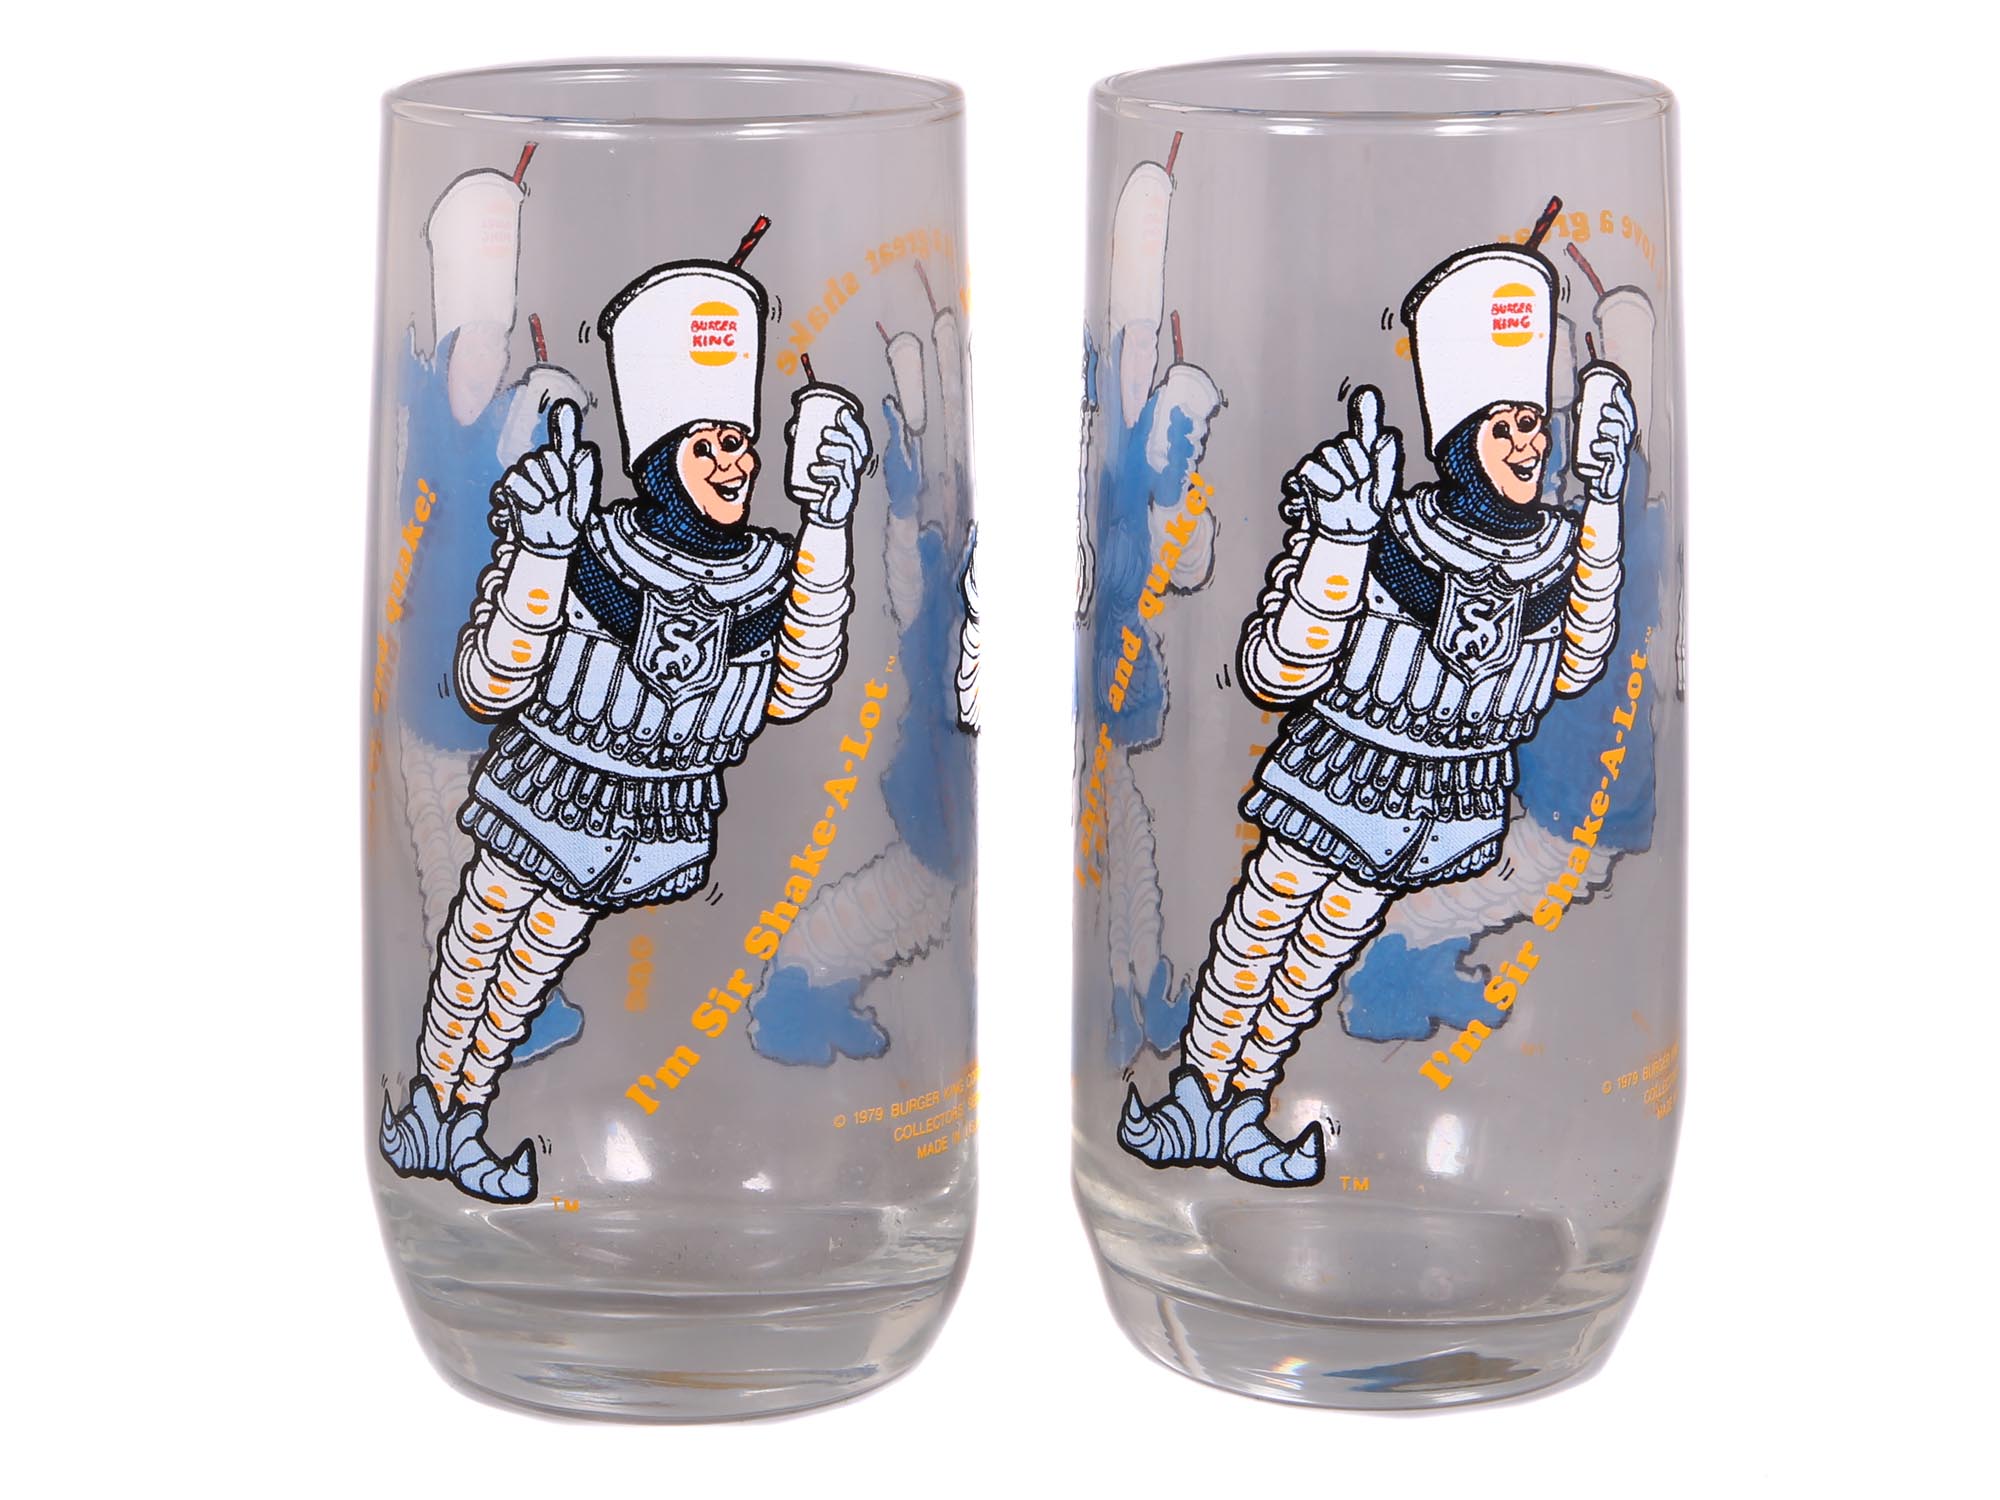 STAR WARS AND DUKE OF DOUBT GLASS SETS VINTAGE PIC-4